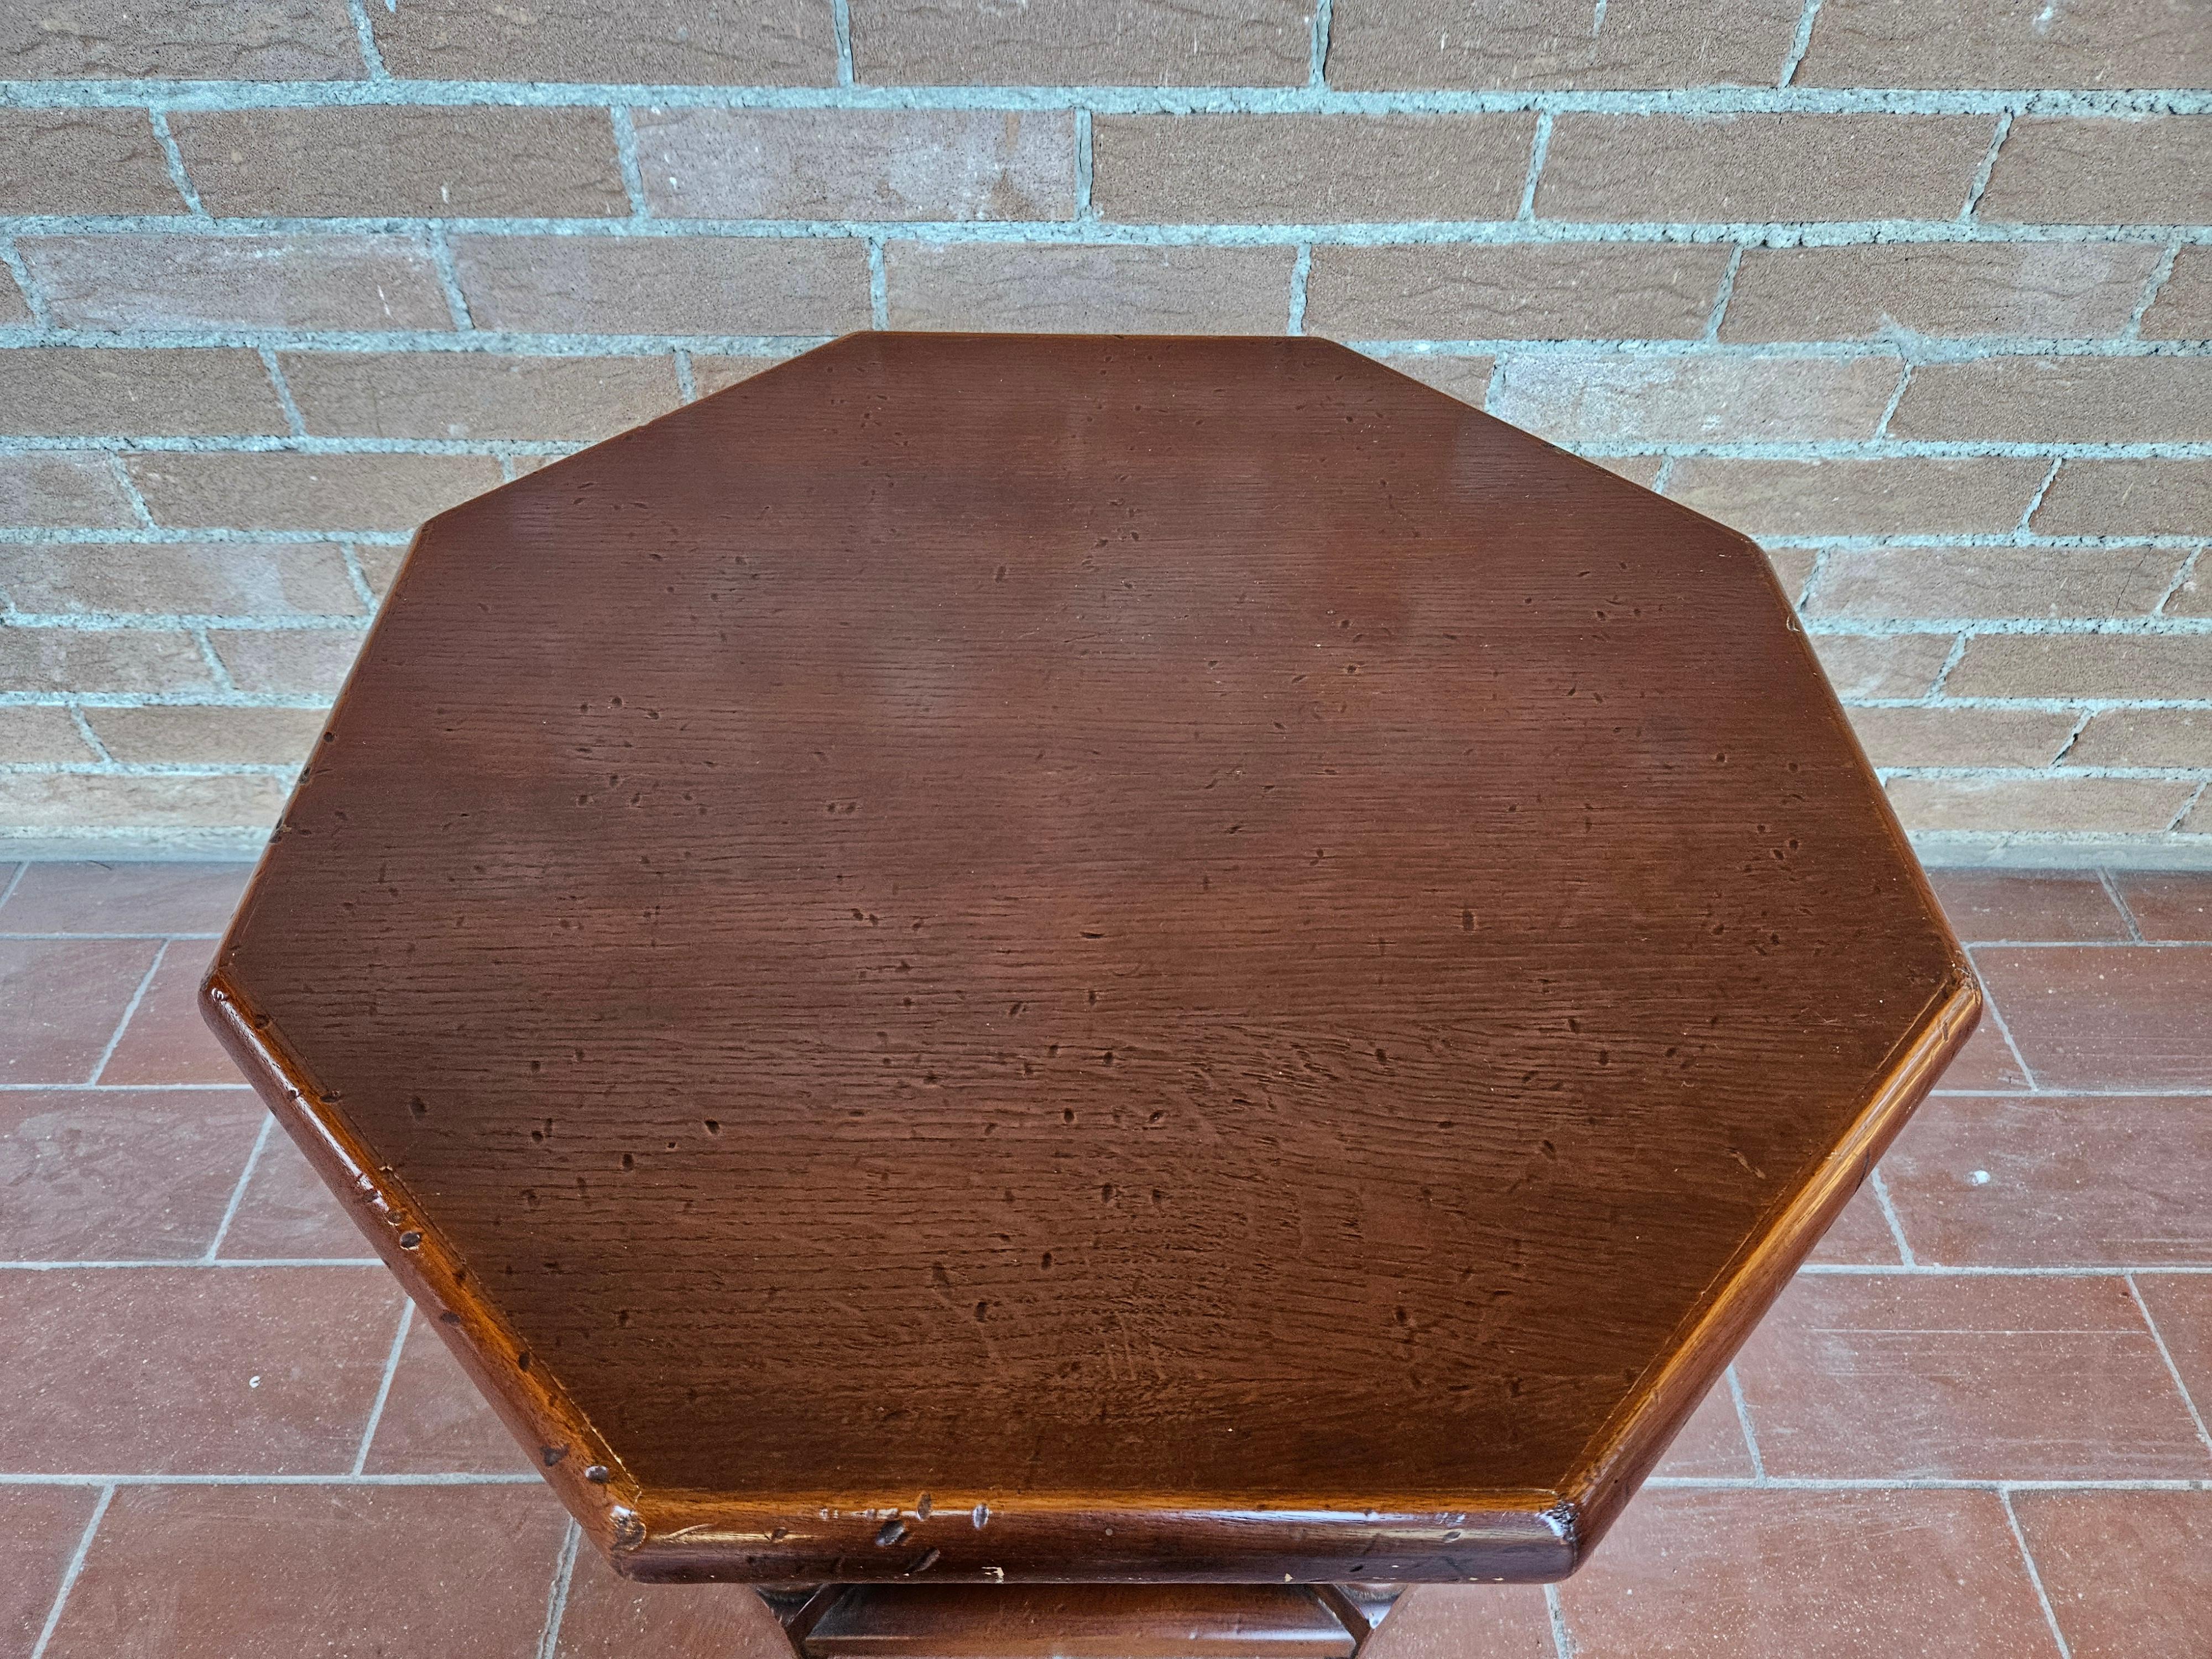 Small wooden octagonal shaped coffee table, perfect for use as a coffee table or for hosting guests.

Normal signs of wear due to age and use.
